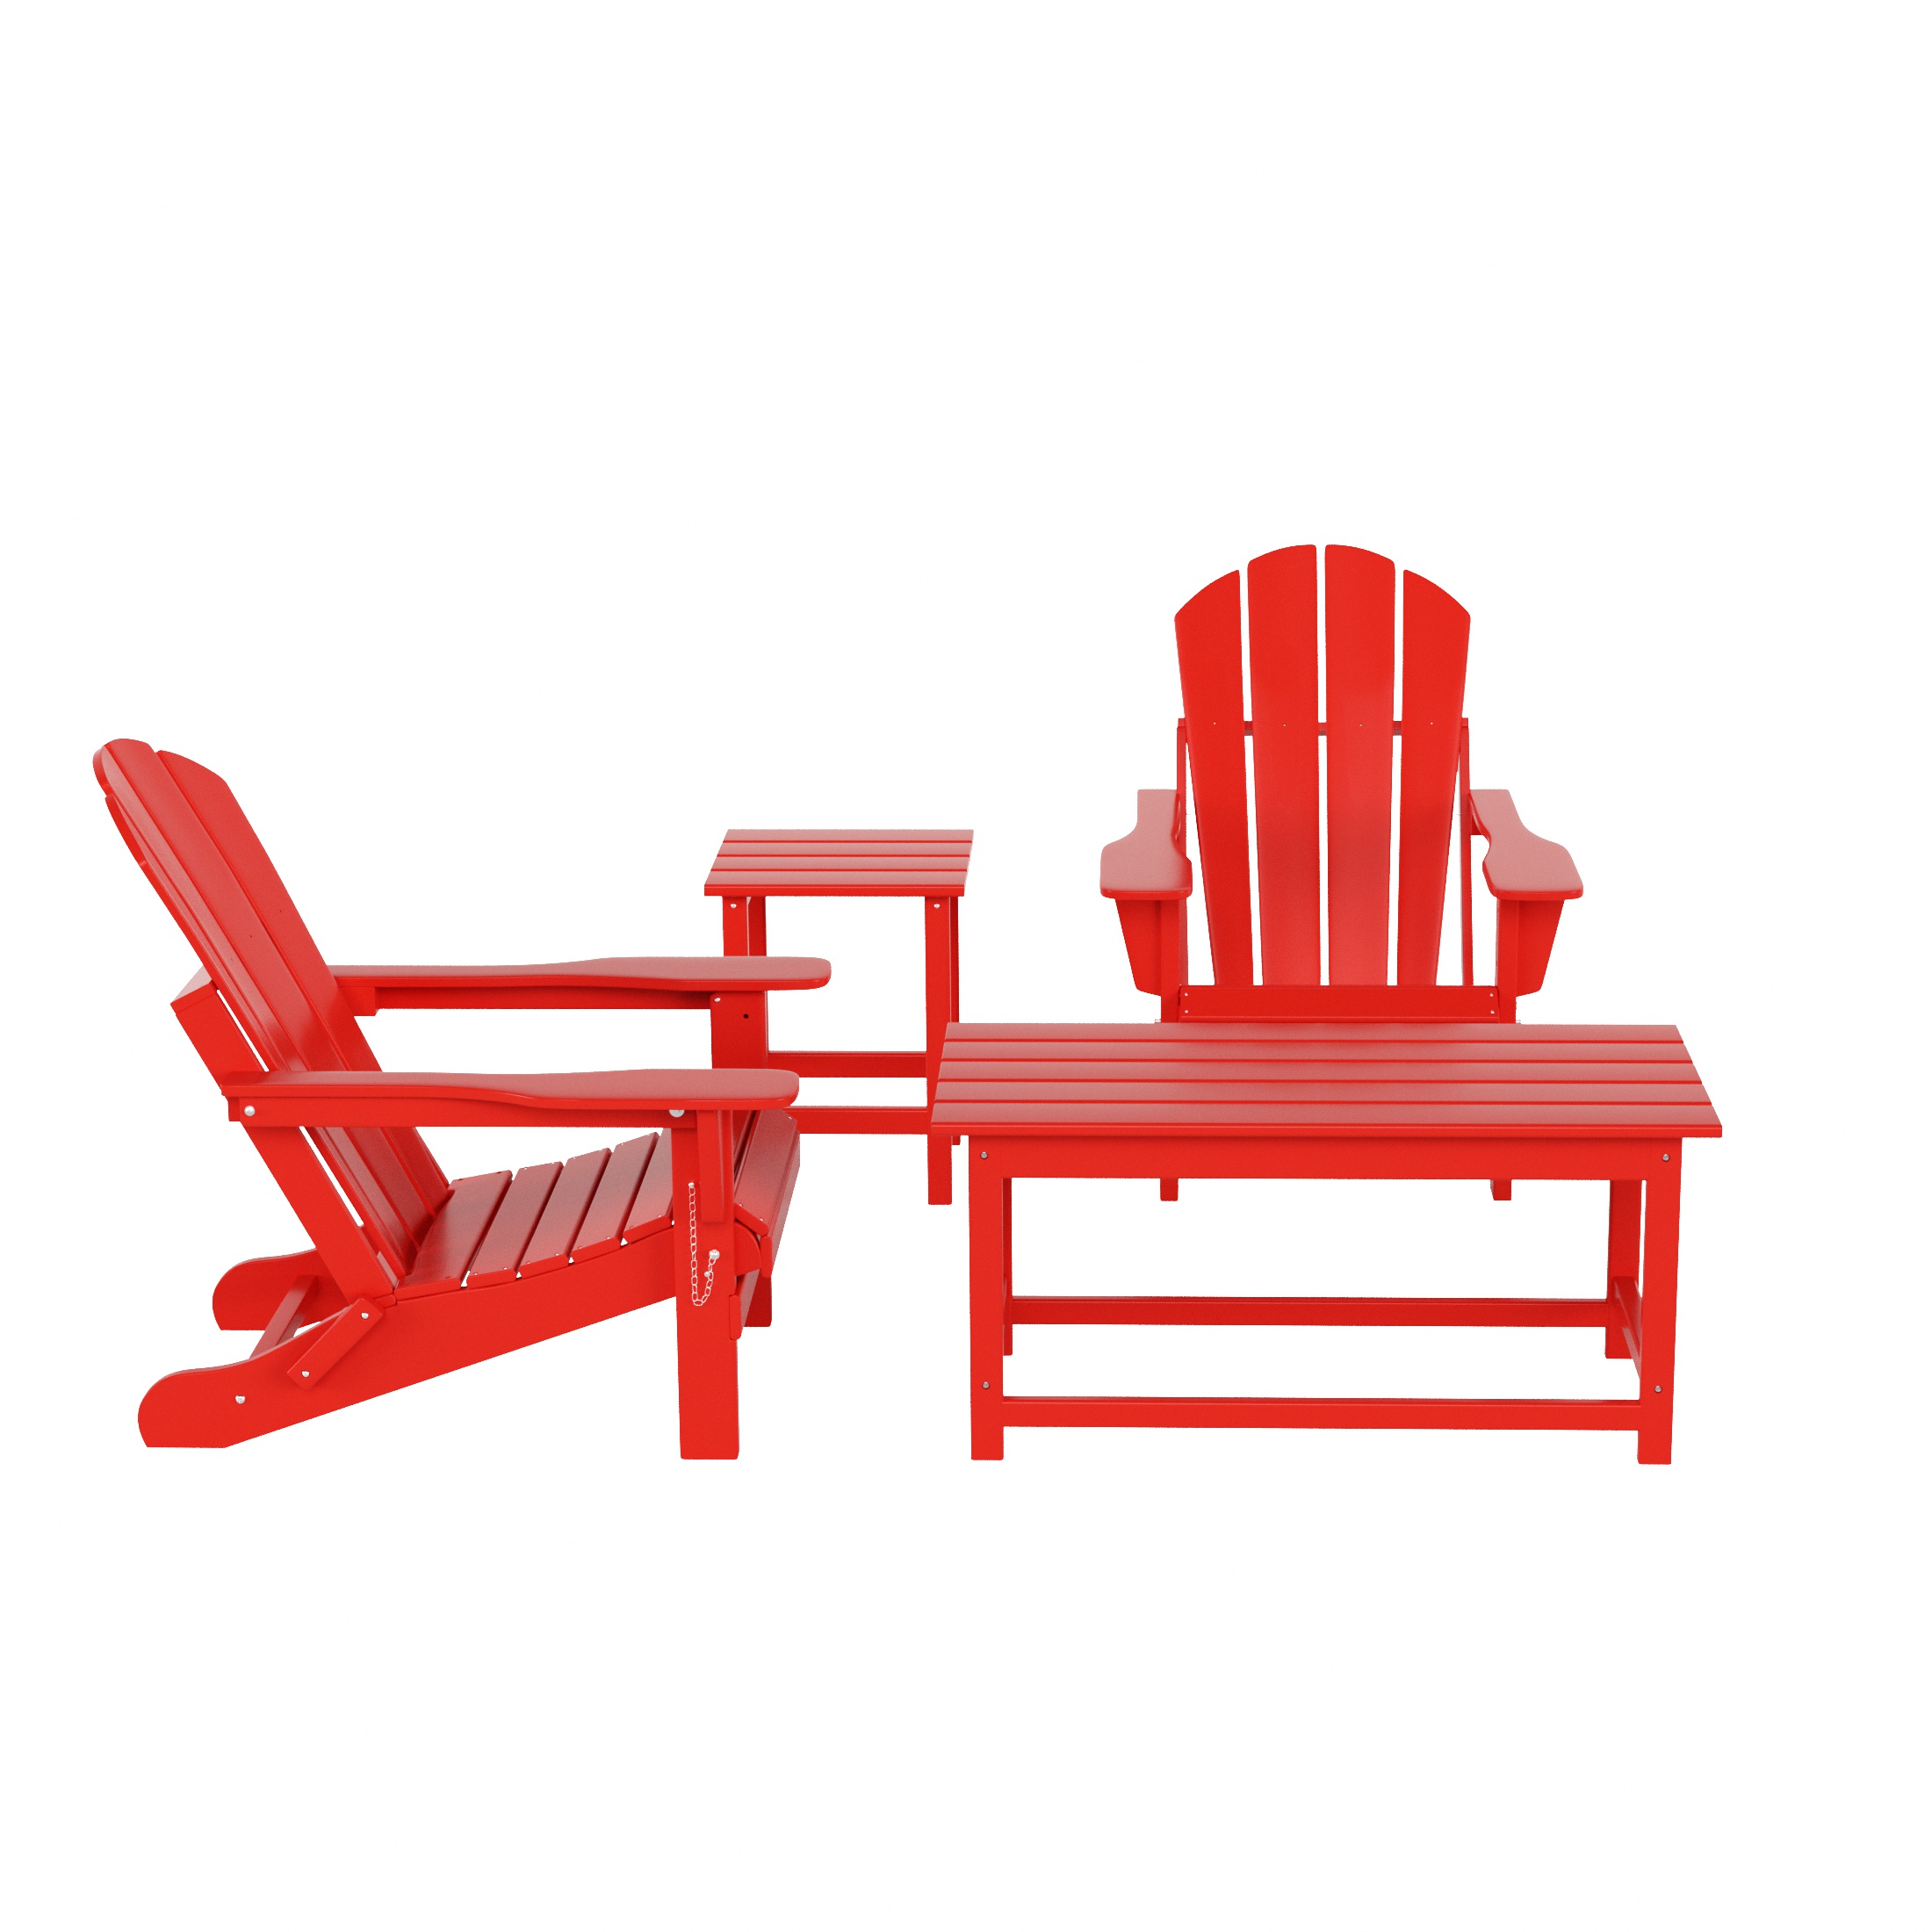 WestinTrends Malibu 4-Pieces Outdoor Patio Furniture Set, All Weather Outdoor Seating Plastic Adirondack Chair Set of 2 with Coffee Table and Side Table, Red - image 3 of 7